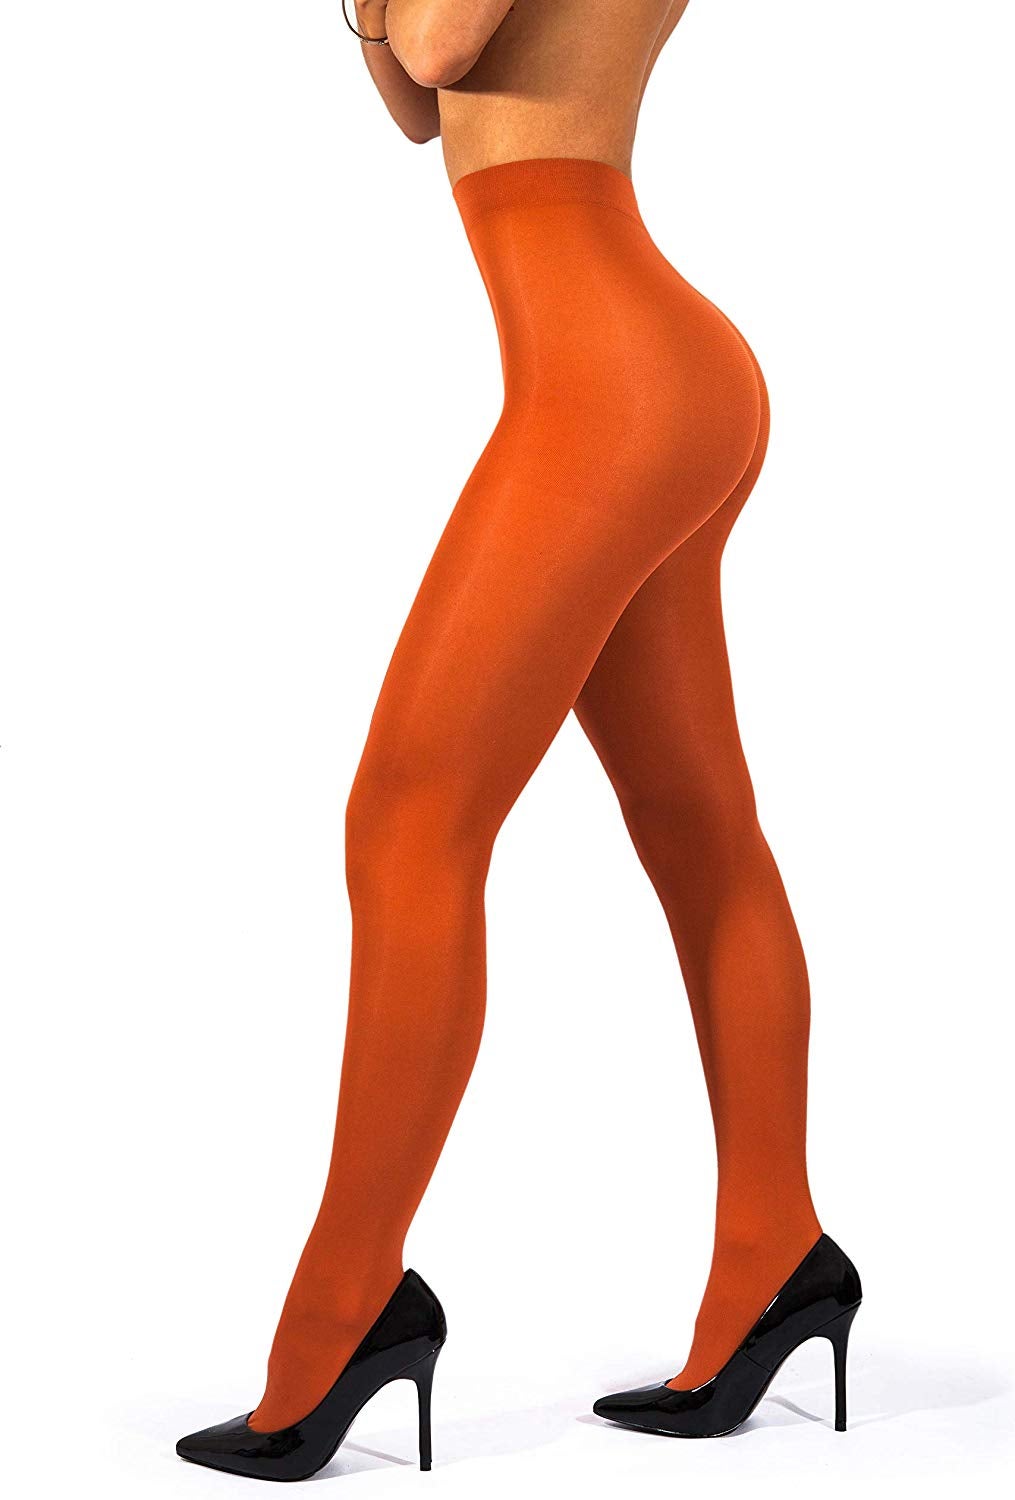 File:Orange Patterned Tights with a Black Dress for Halloween  (22699747570).jpg - Wikimedia Commons